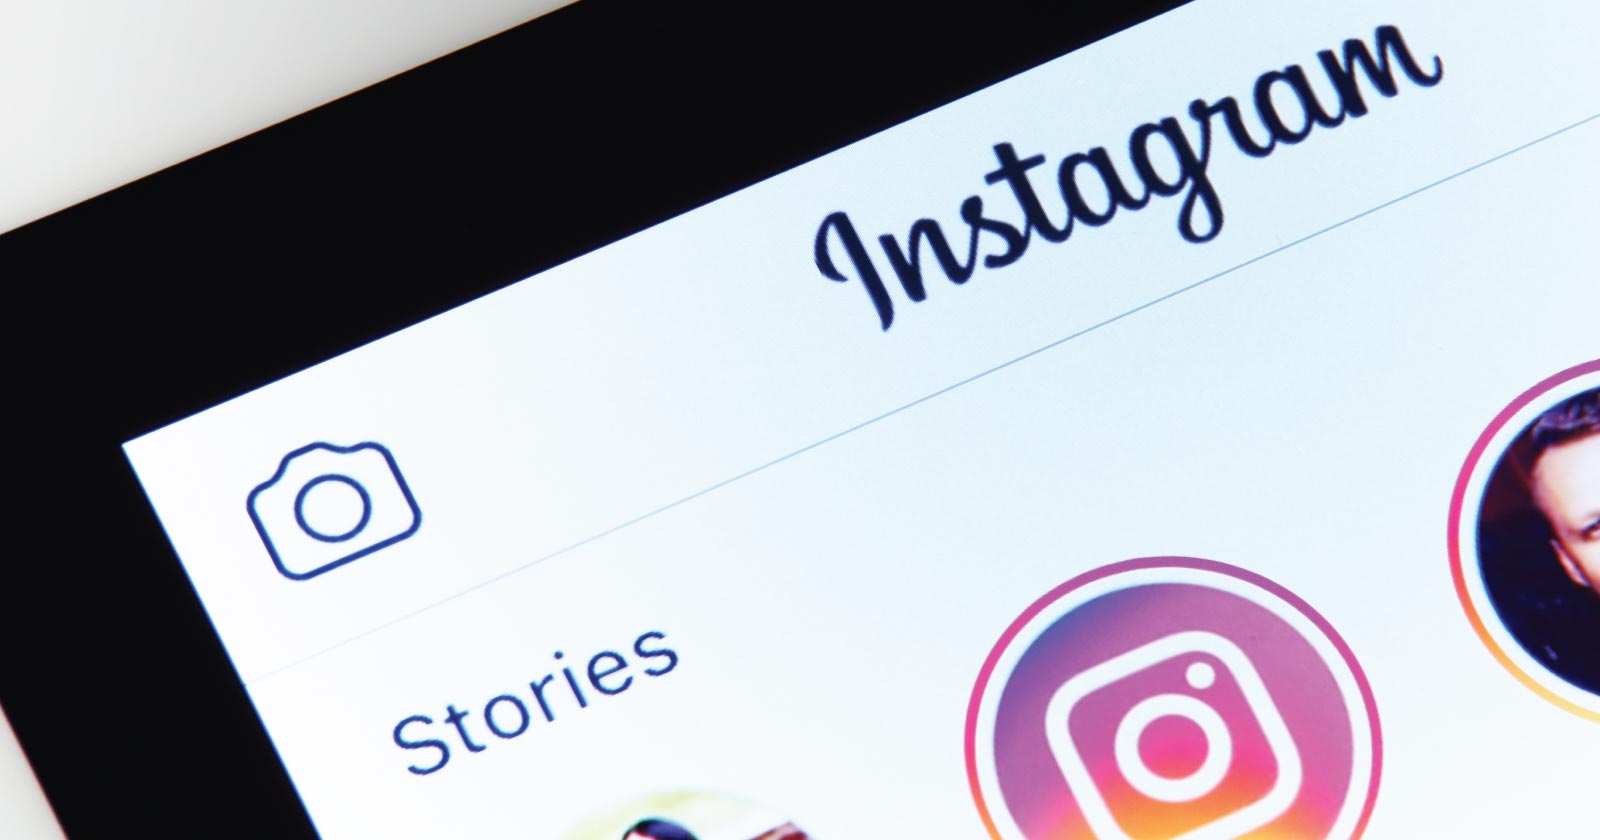 How to Gain Your First (or Next) 1,000 Instagram Followers